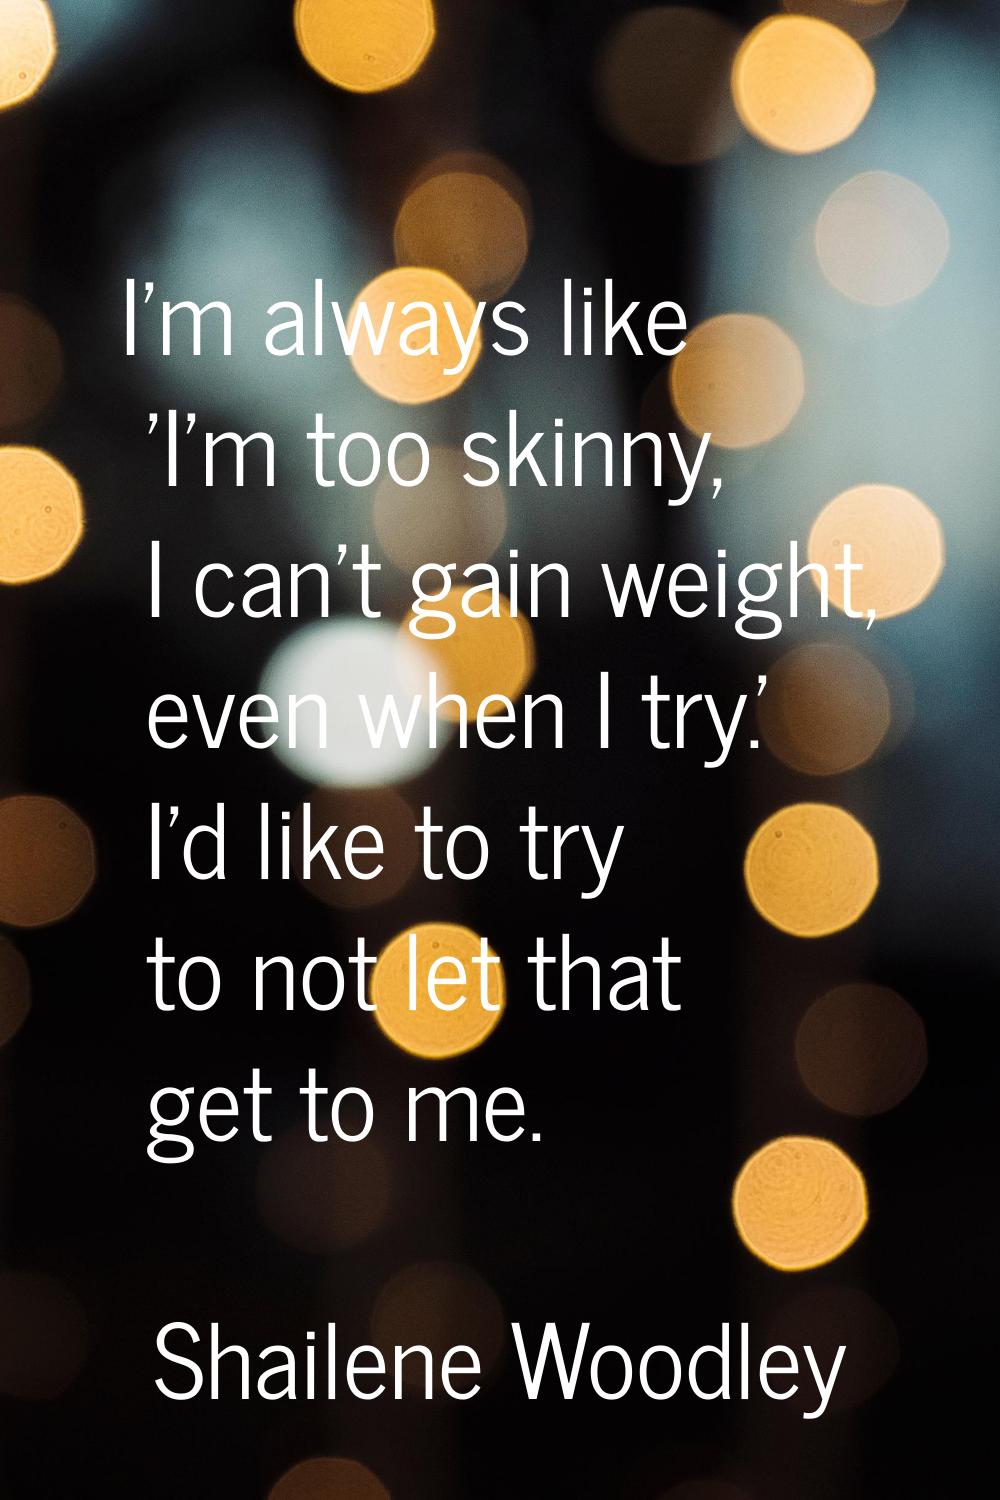 I'm always like 'I'm too skinny, I can't gain weight, even when I try.' I'd like to try to not let 